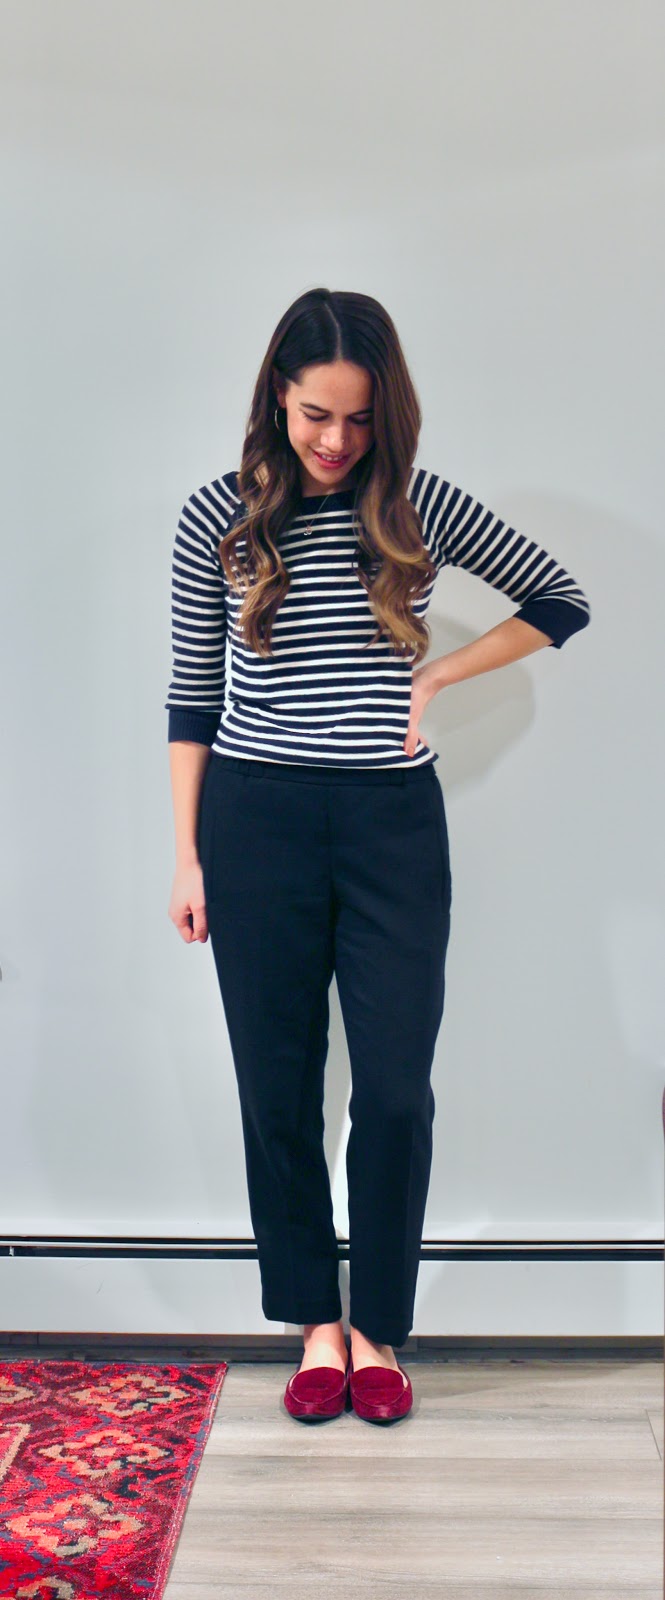 Jules in Flats - Striped Sweater with Aritzia Darontal Dress Pants (Business Casual Winter Workwear on a Budget) 